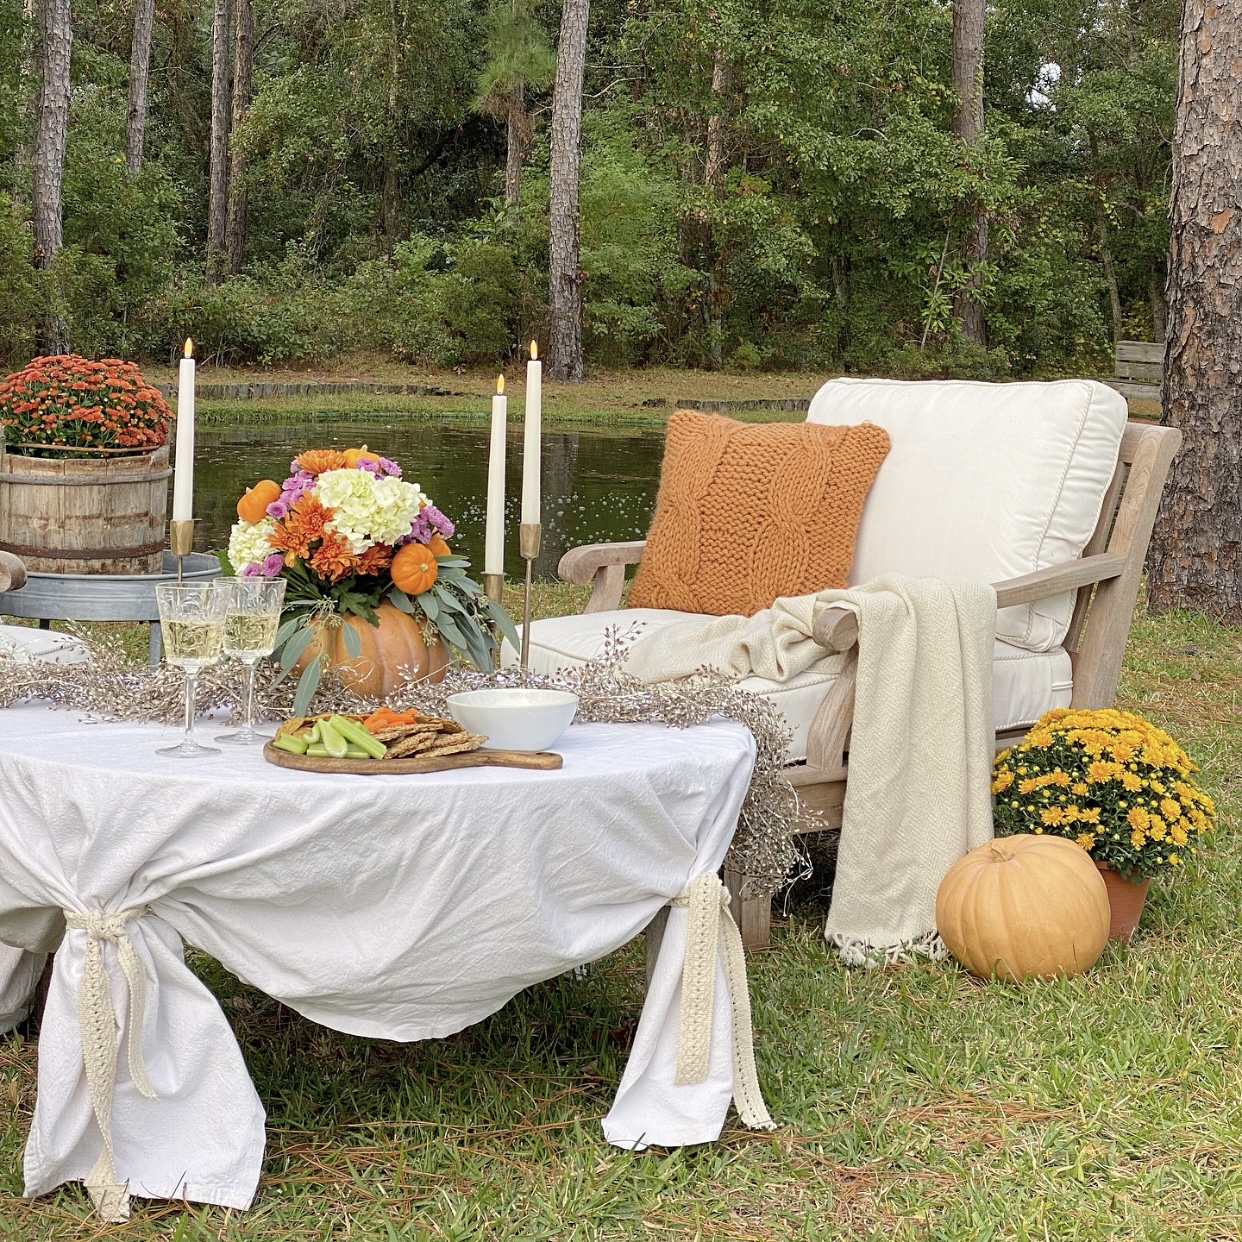 View of cozy chair with a blanket and pillows on it. In the background is the pond. In the foreground is a table with a fall floral arrangement, snacks, and candles.